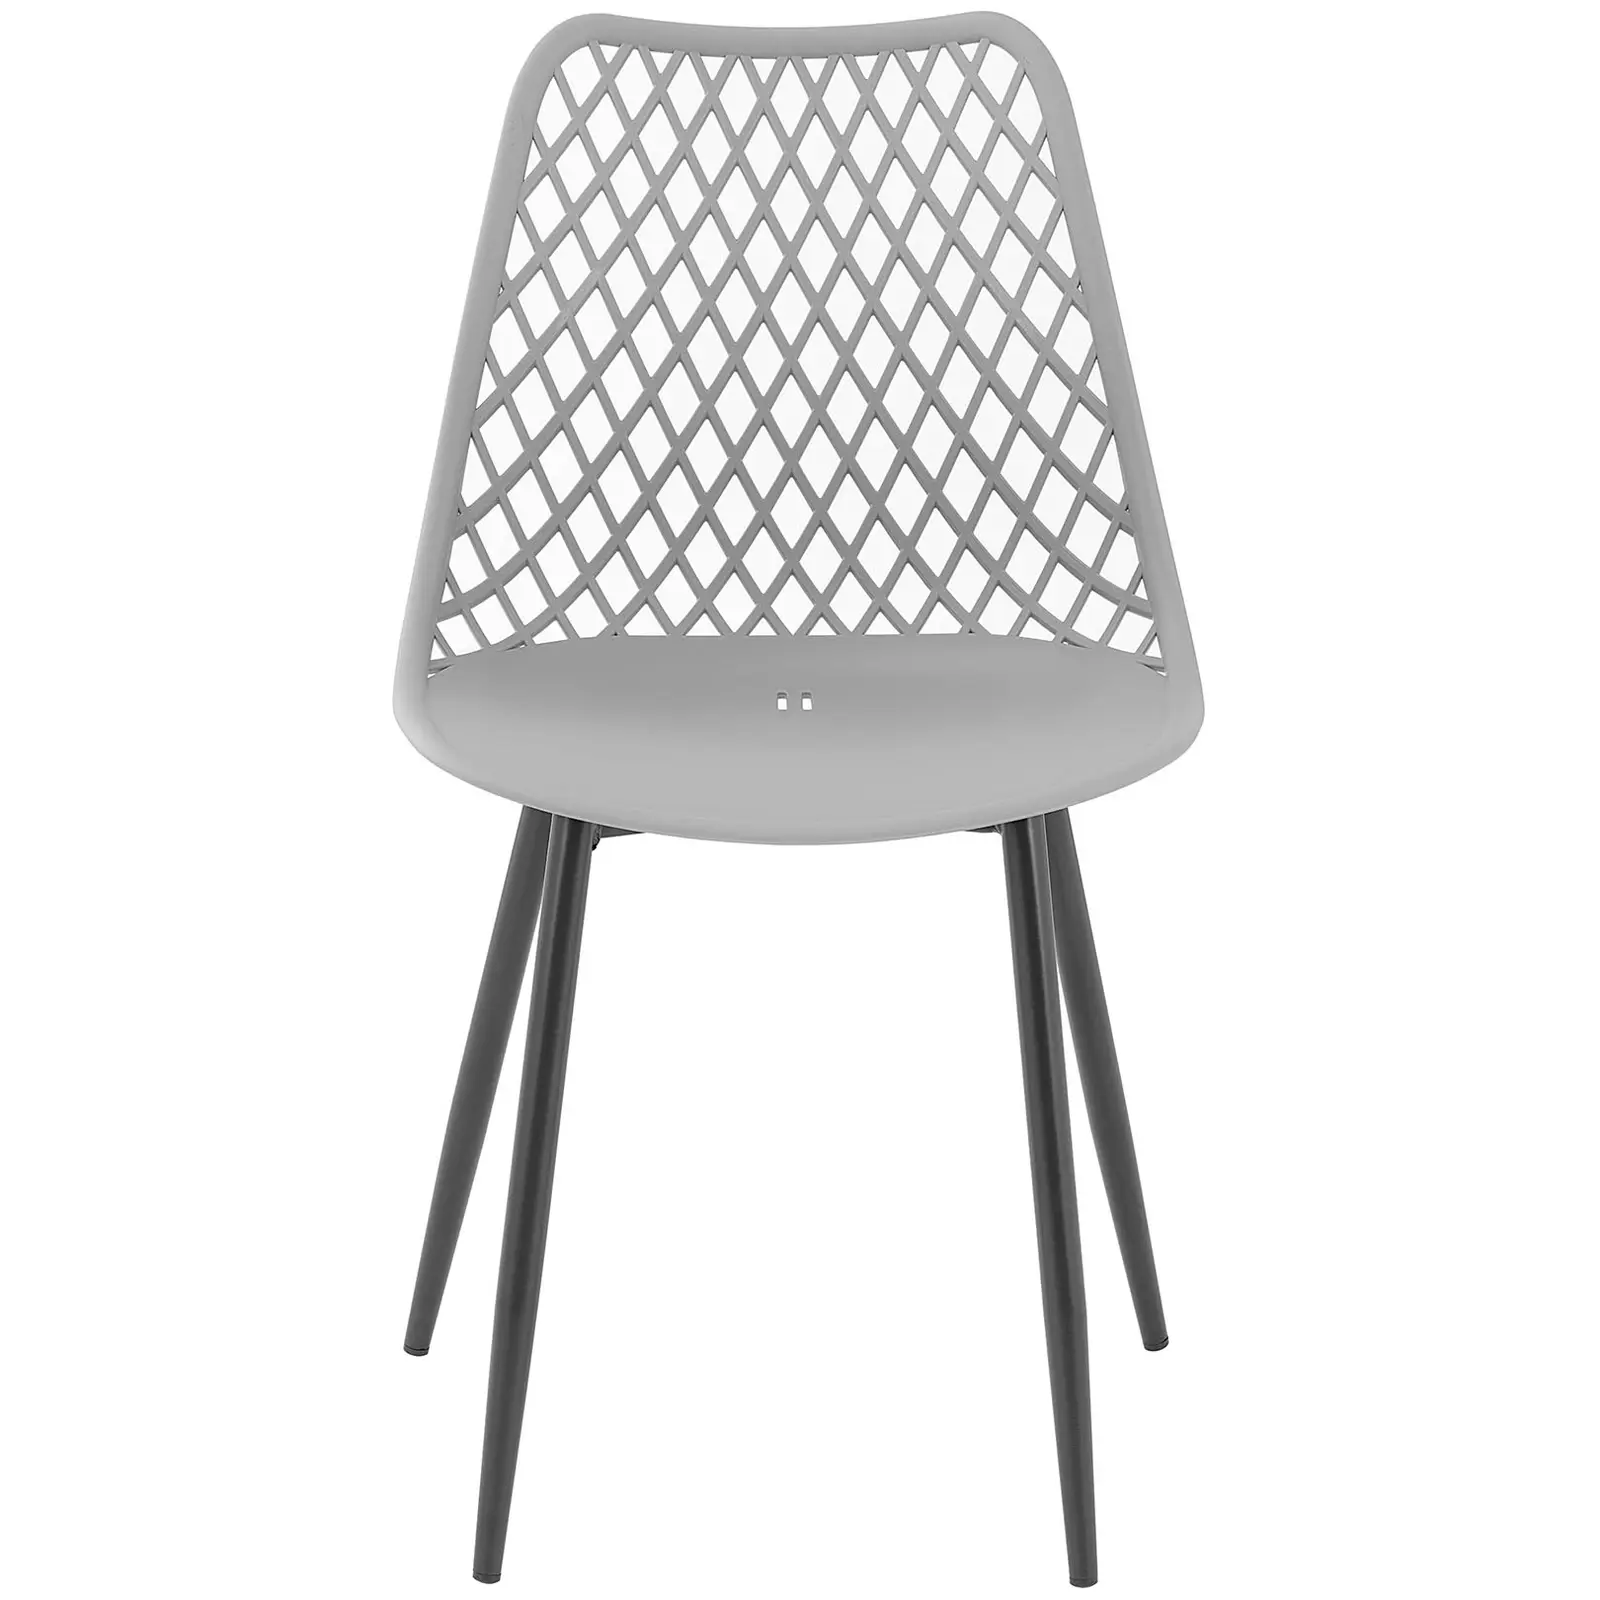 Chair - set of 4 - Royal Catering - up to 150 kg - backrest with air slits - Light grey